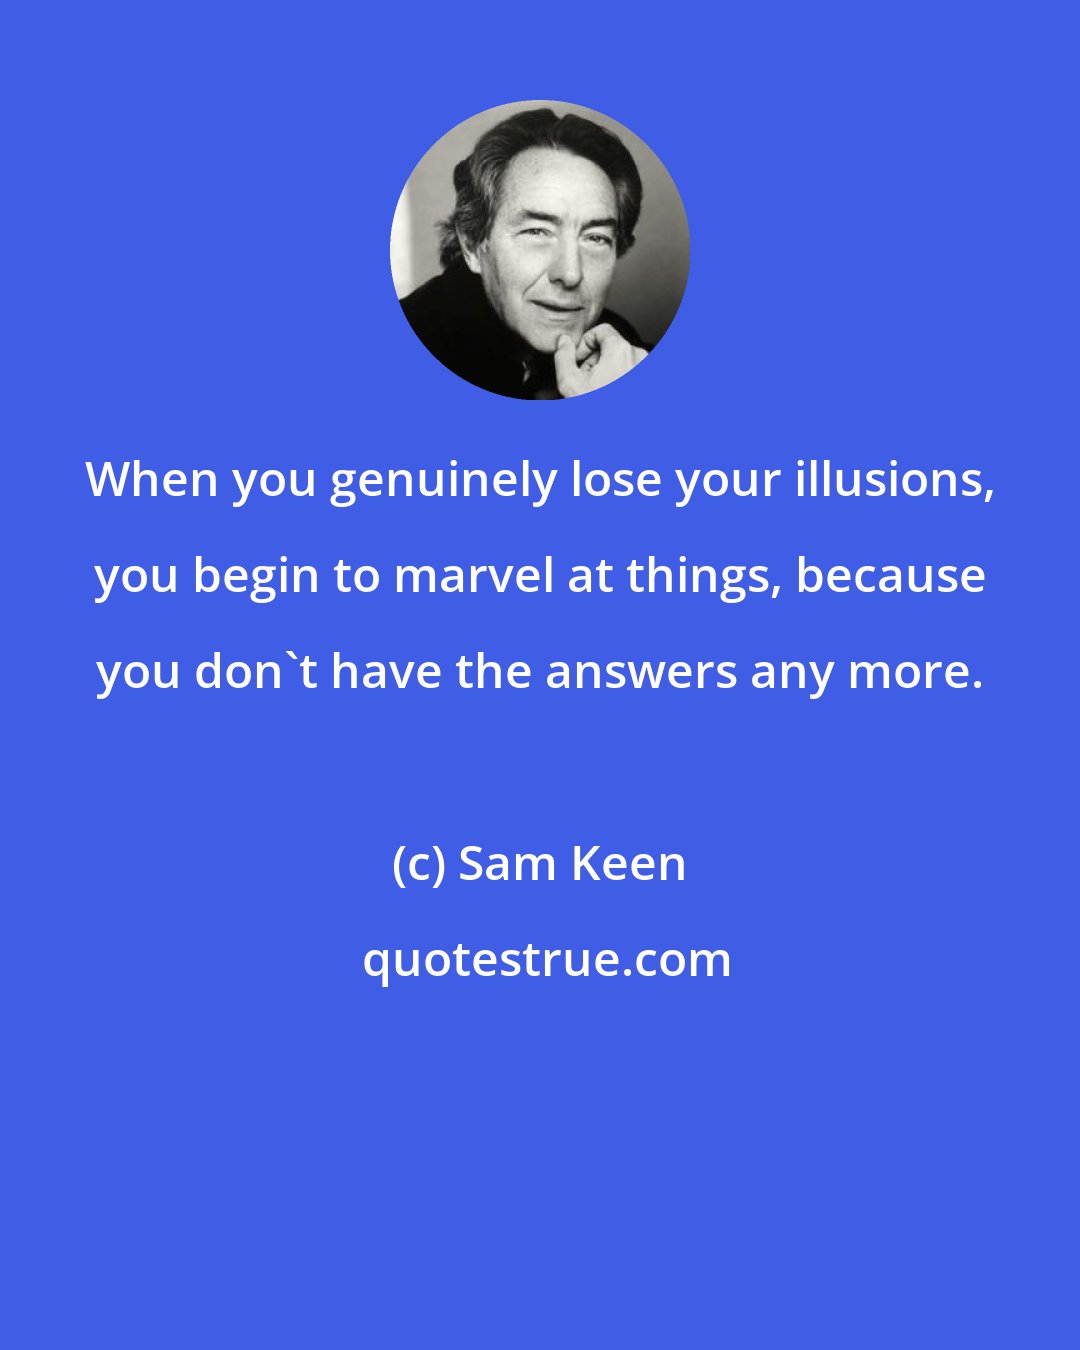 Sam Keen: When you genuinely lose your illusions, you begin to marvel at things, because you don't have the answers any more.